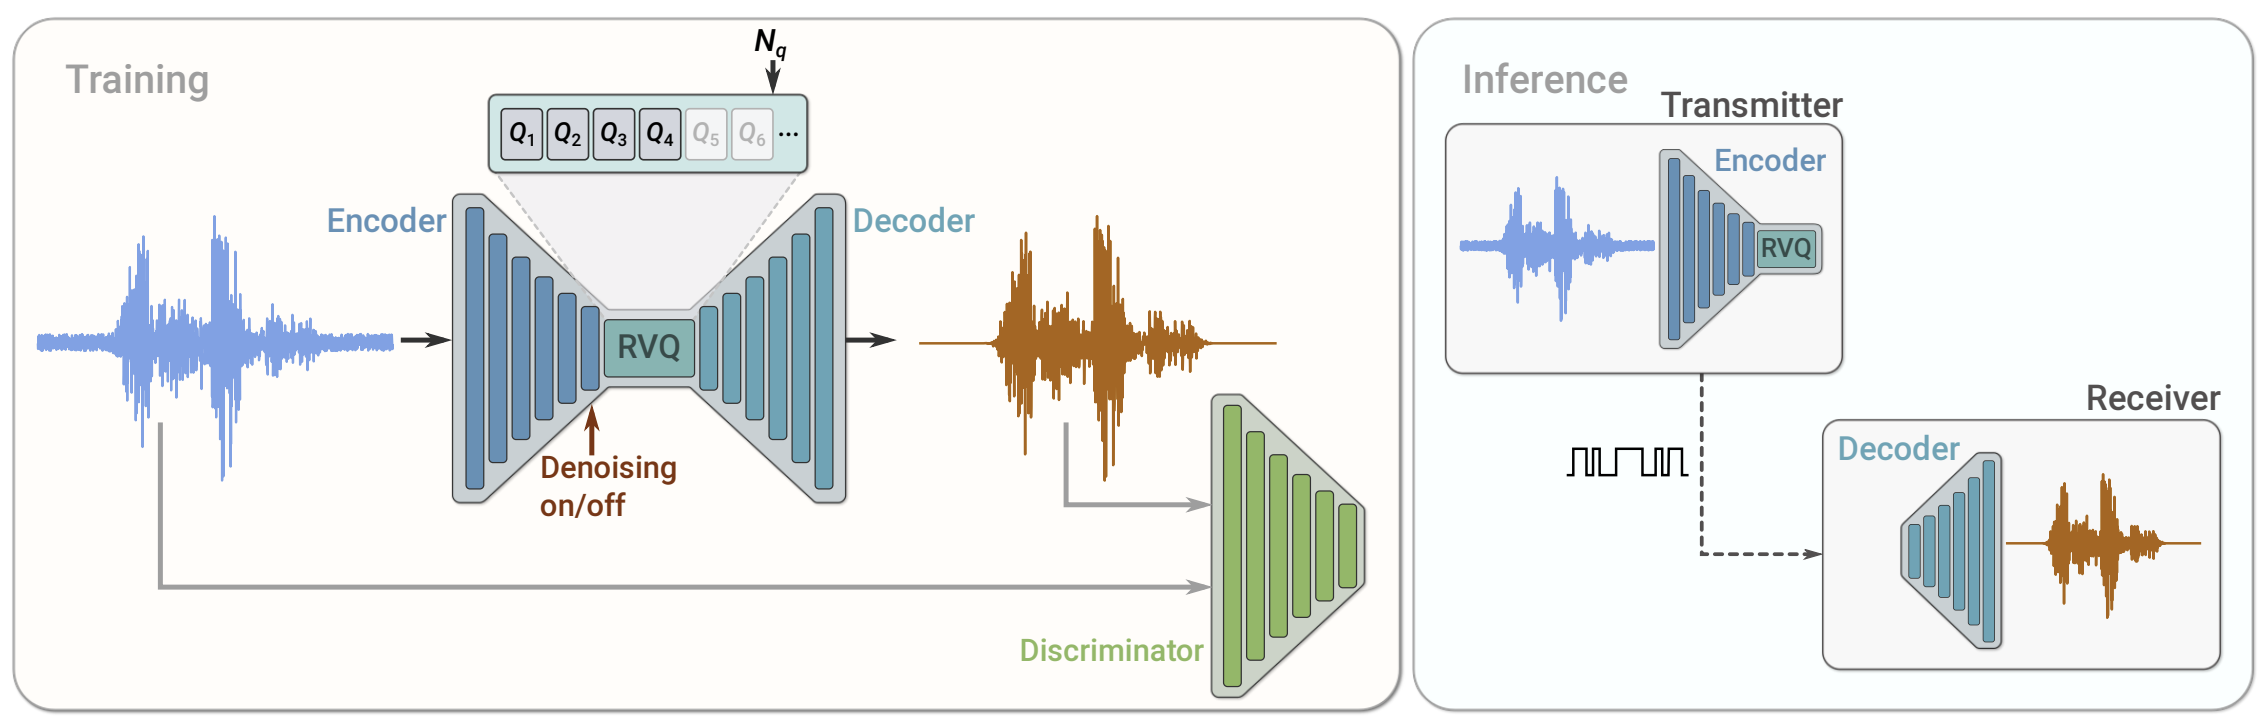 Figure 2 from the SoundStream paper